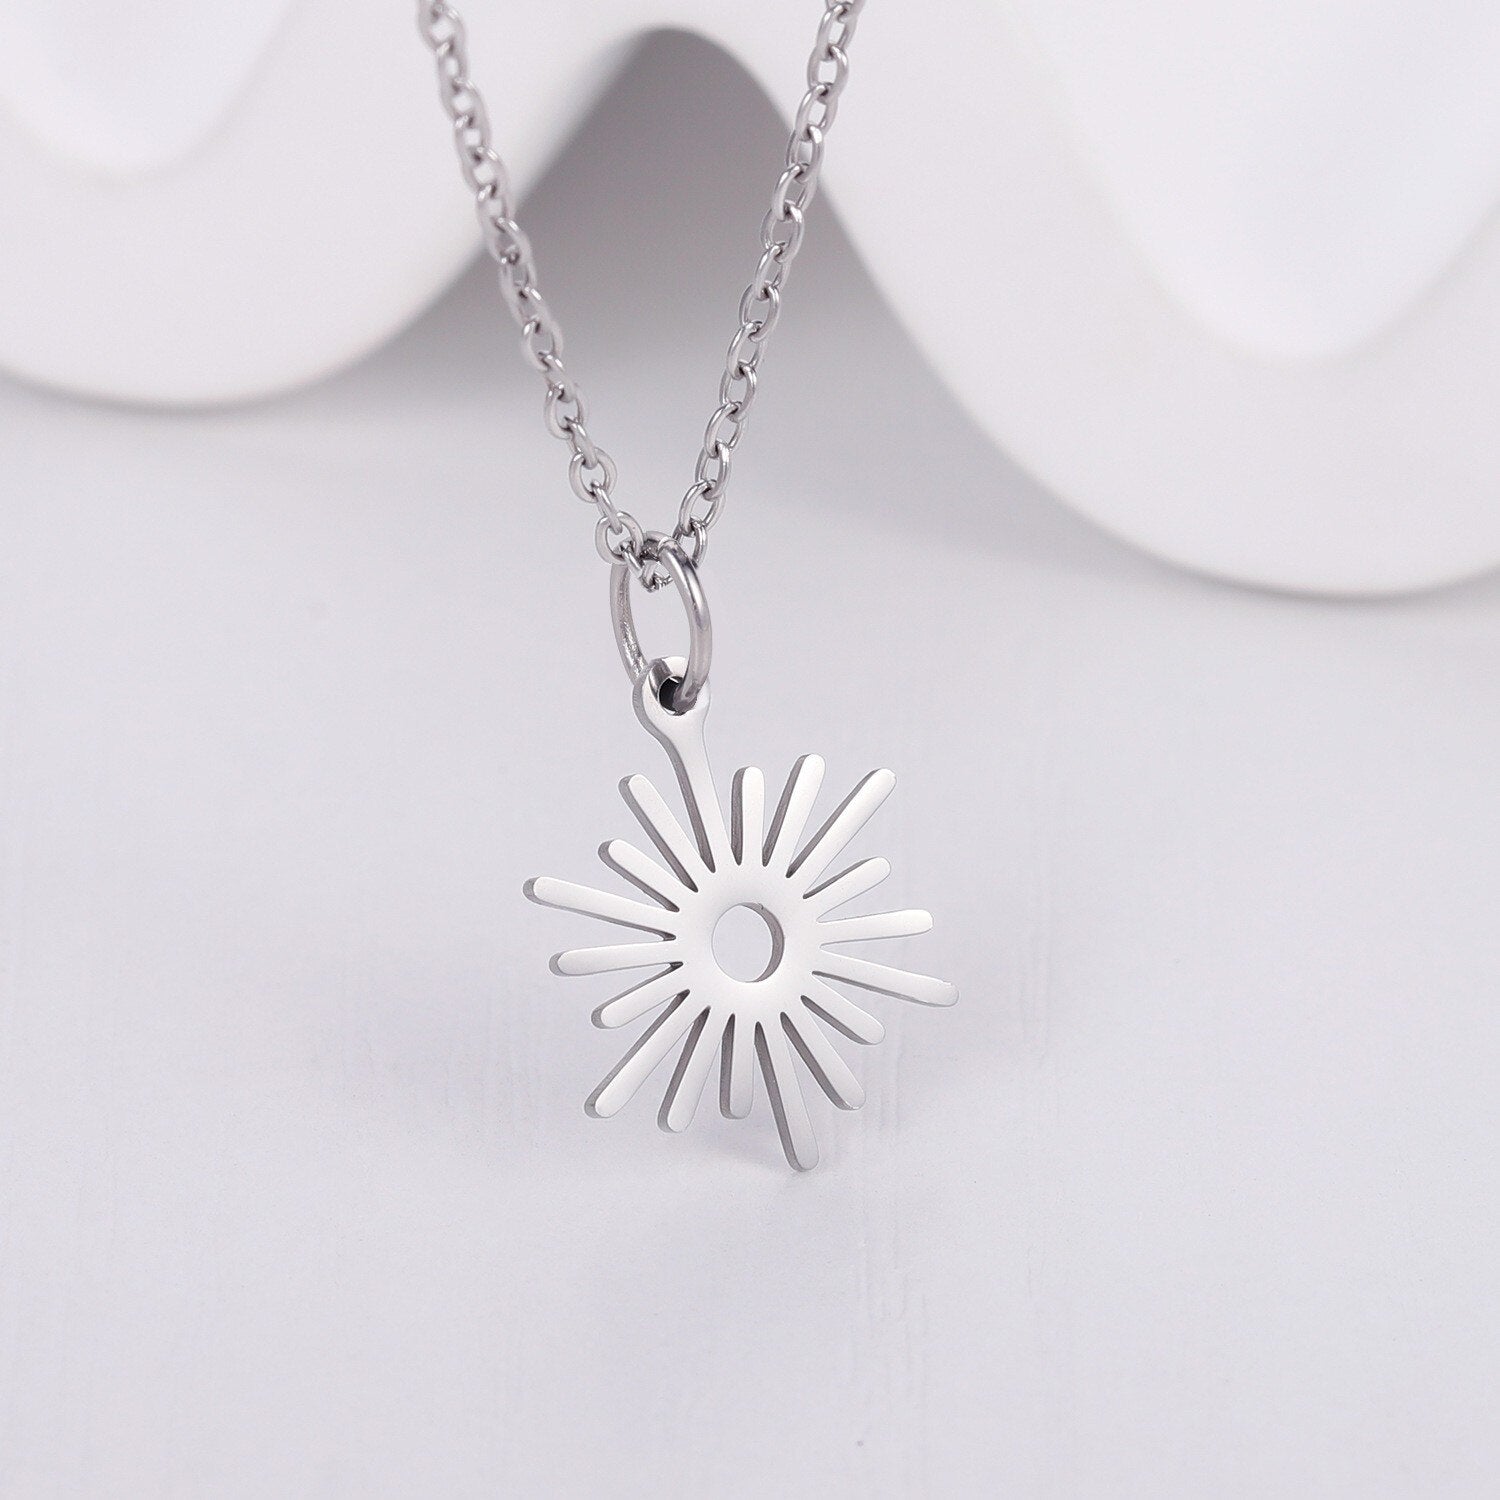 Hollow Sunflower Pendant Necklace Women&#39;s Necklace New Fashion Stainless Steel Jewelry Hip Hop Punk Accessories Wholesale - Charlie Dolly